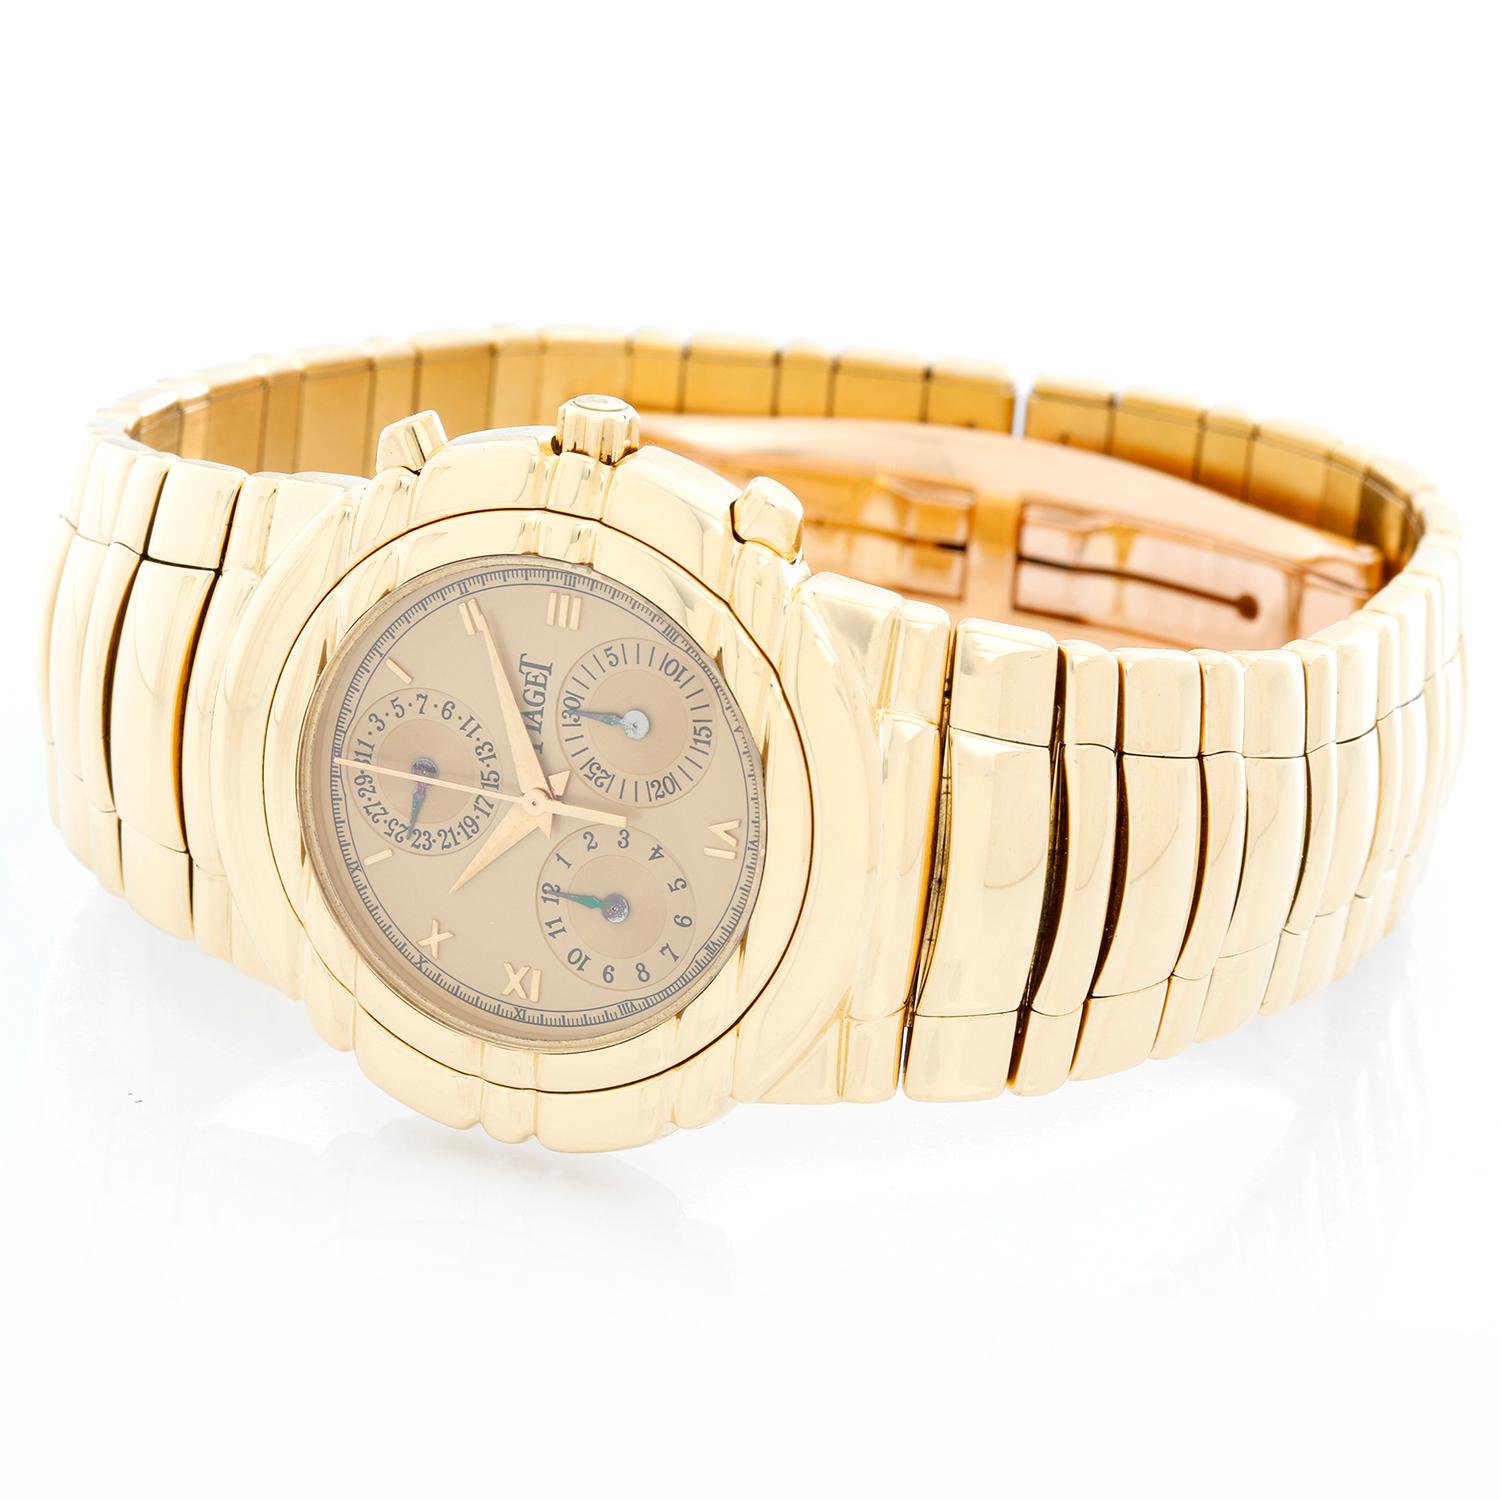 Piaget Tanagra Chronograph Yellow Gold Watch Ref 14081 - Quartz. 18K Yellow gold ( 33 mm ). Champagne dial with three subdials. 18K Yellow gold bracelet. Pre-Owned with box.